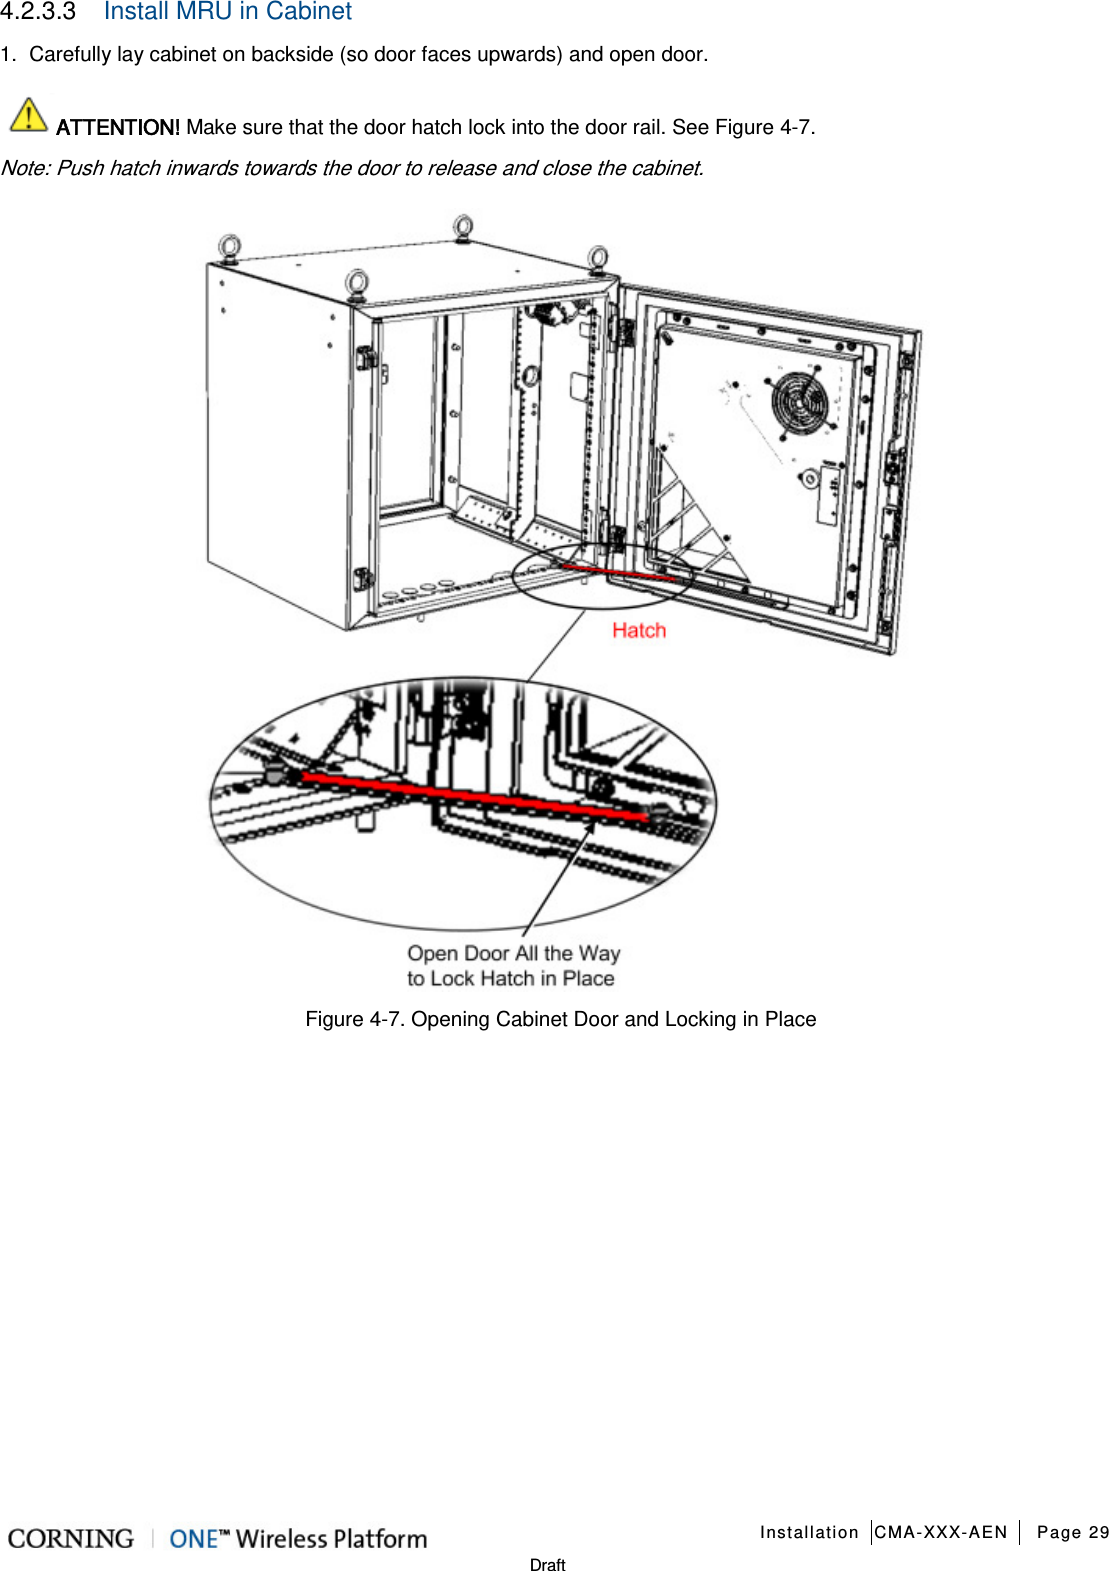   Installation CMA-XXX-AEN Page 29   Draft 4.2.3.3  Install MRU in Cabinet 1.  Carefully lay cabinet on backside (so door faces upwards) and open door.   ATTENTION! Make sure that the door hatch lock into the door rail. See Figure  4-7. Note: Push hatch inwards towards the door to release and close the cabinet.  Figure  4-7. Opening Cabinet Door and Locking in Place    